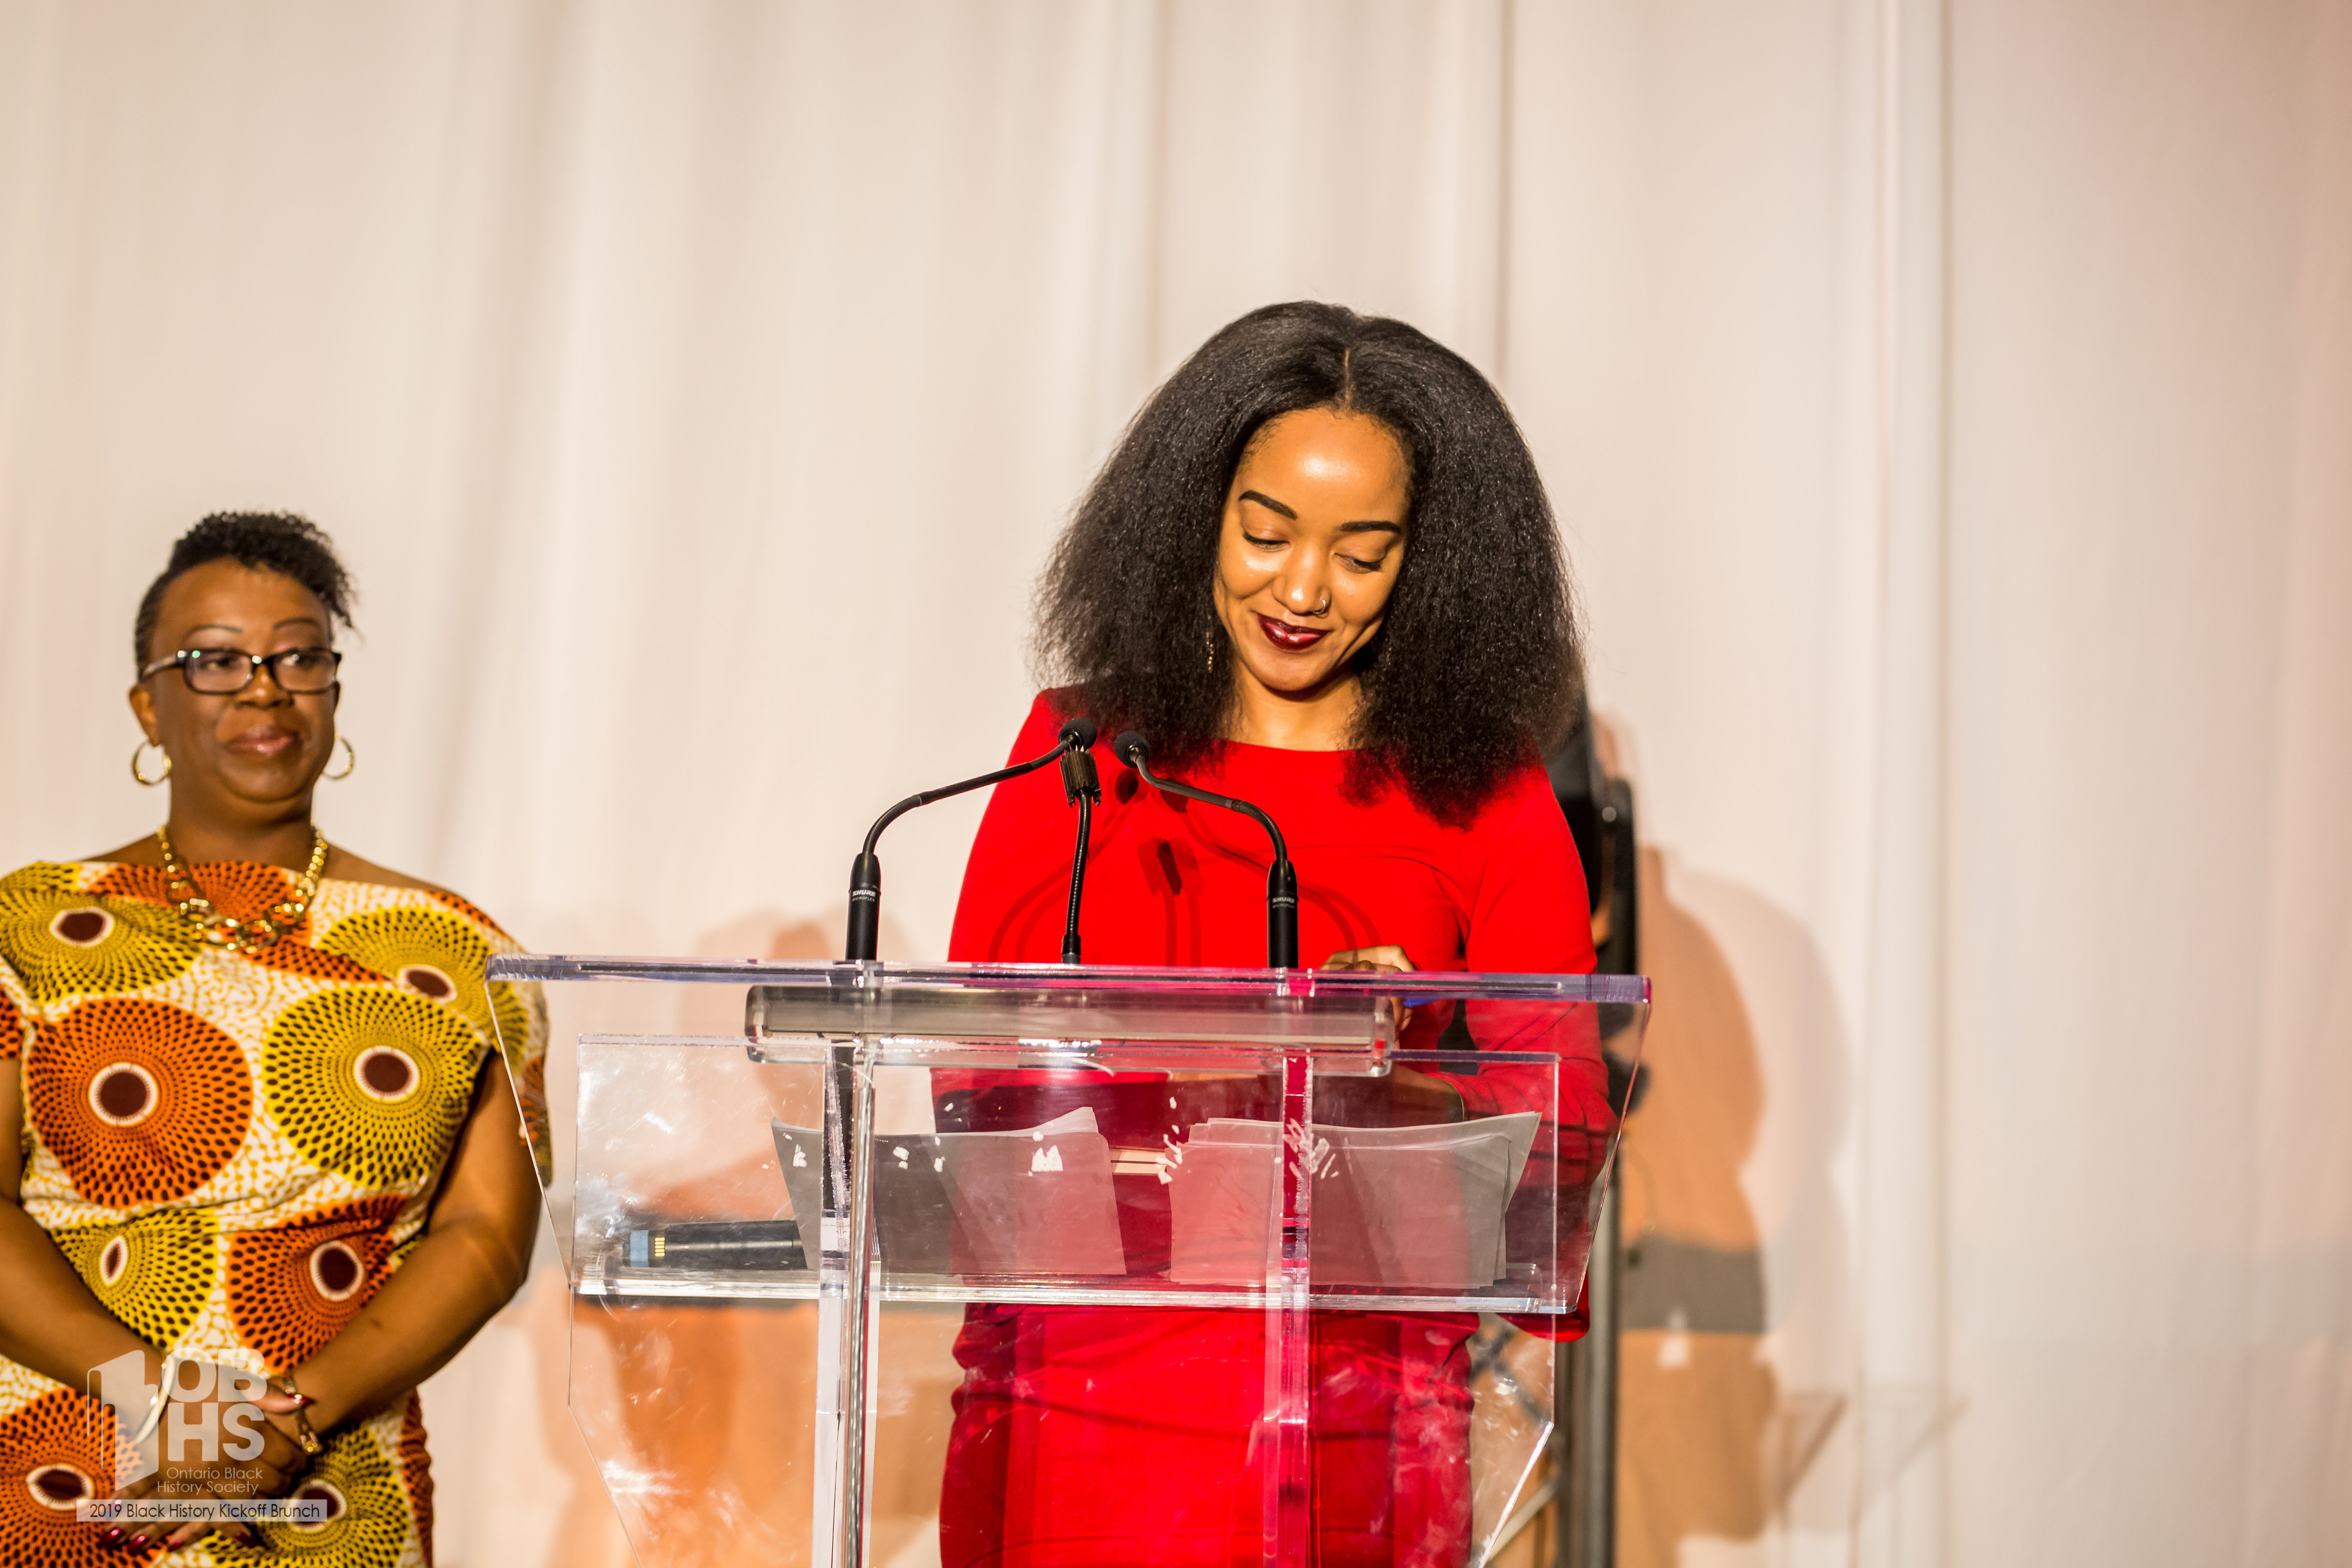 Host Amanda Parris and OBHS President Natasha Henry share a proud moment with the audience - photo by www.sayhilondon.com